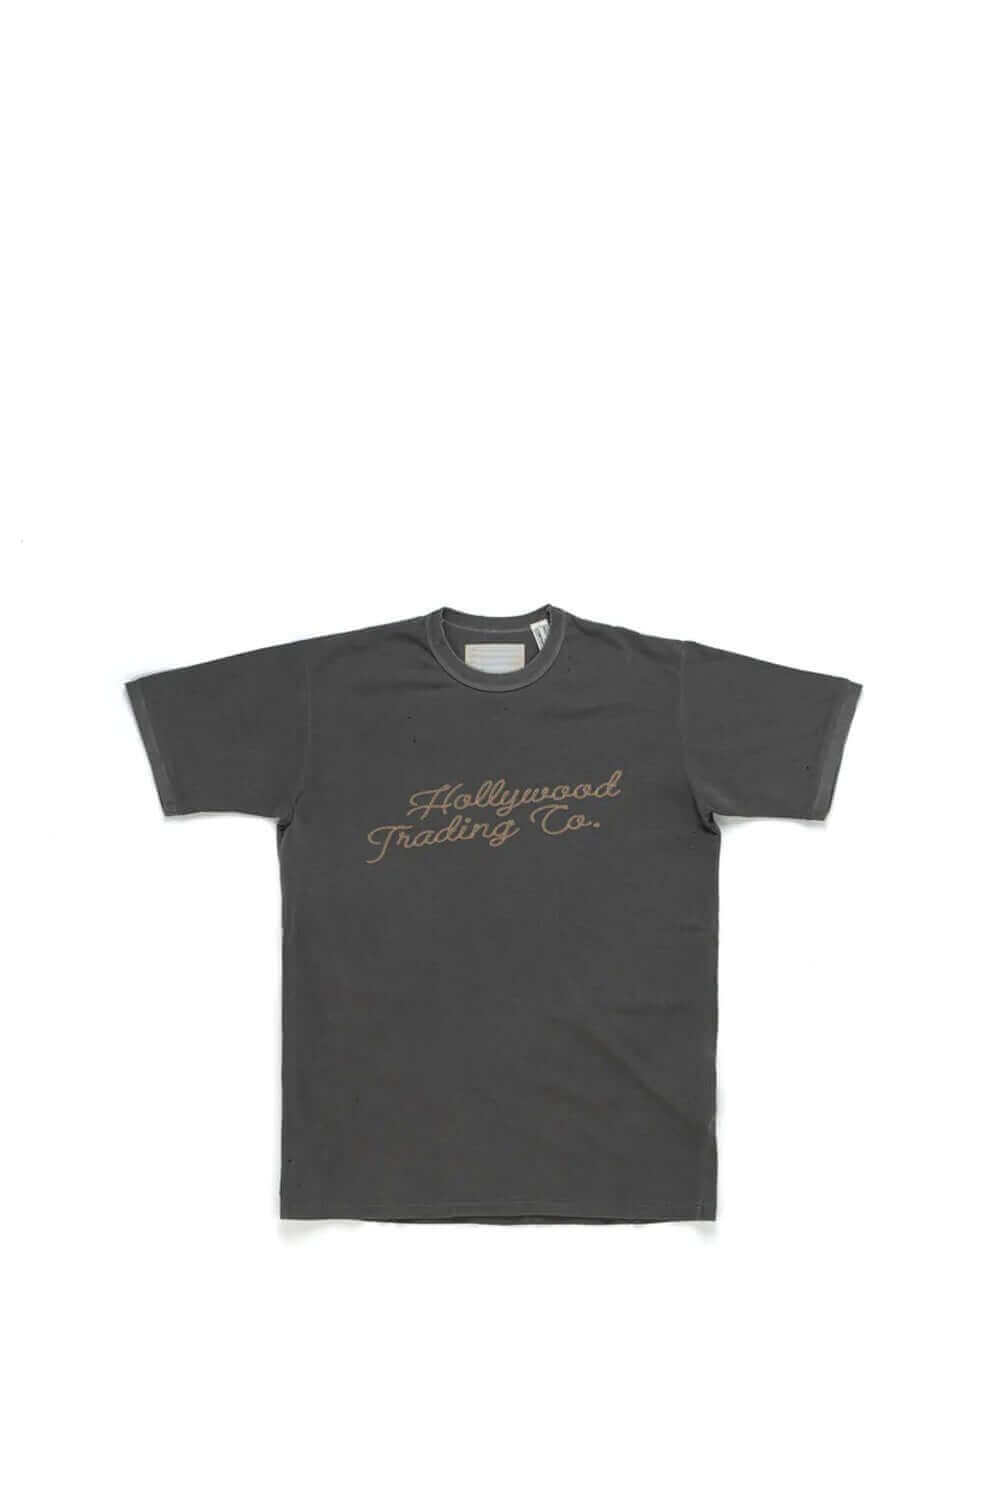 ARMLESS - HOLLYWOOD Regular fit t-shirt printed on the front. Composition: 100% Cotton HTC LOS ANGELES